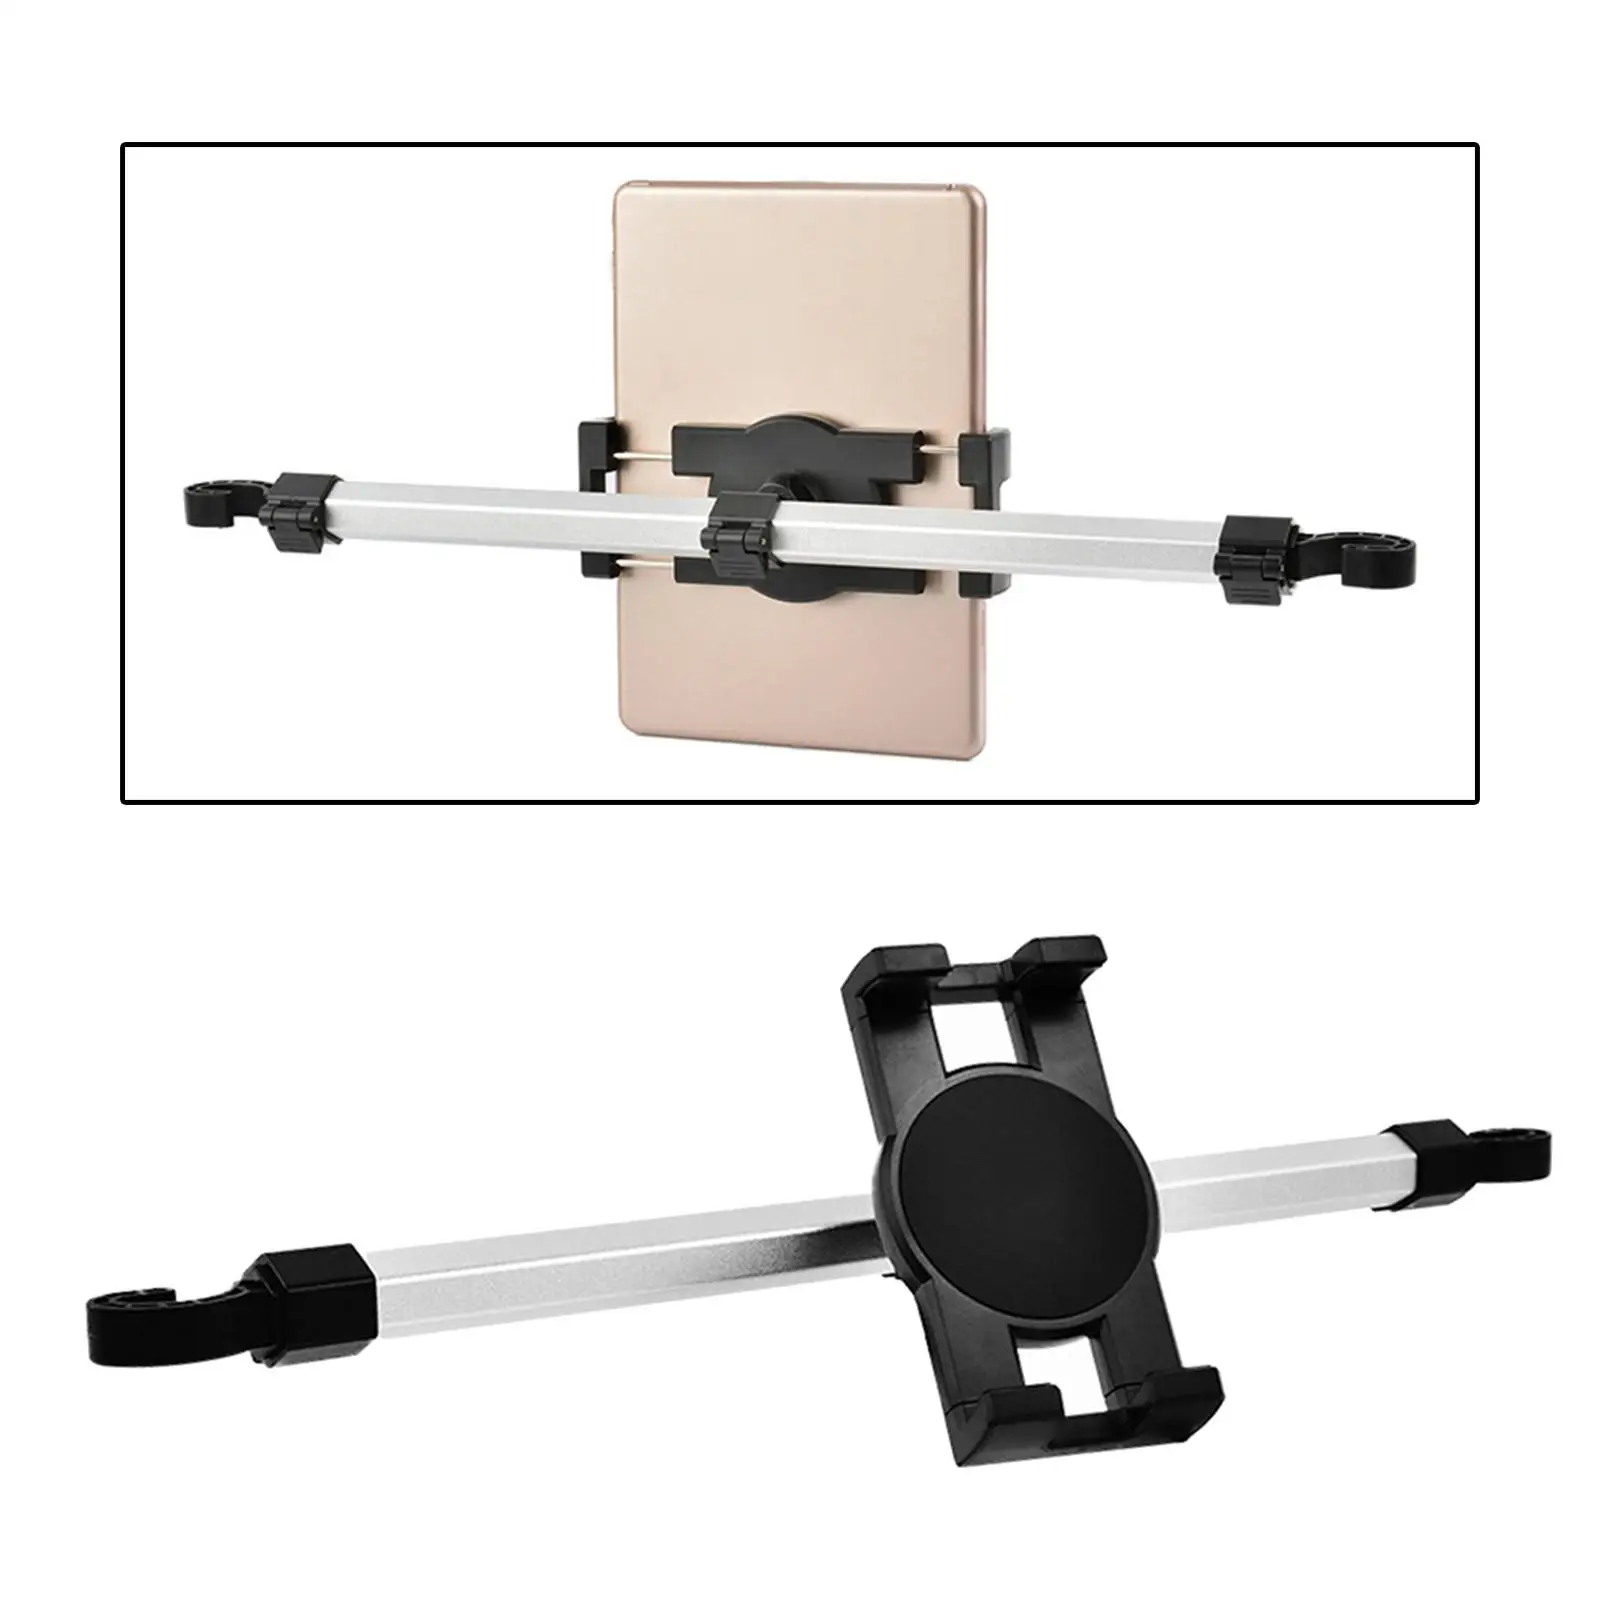 Car Tablet Holder Portable Stretchable for Tablet Smartphone Watching